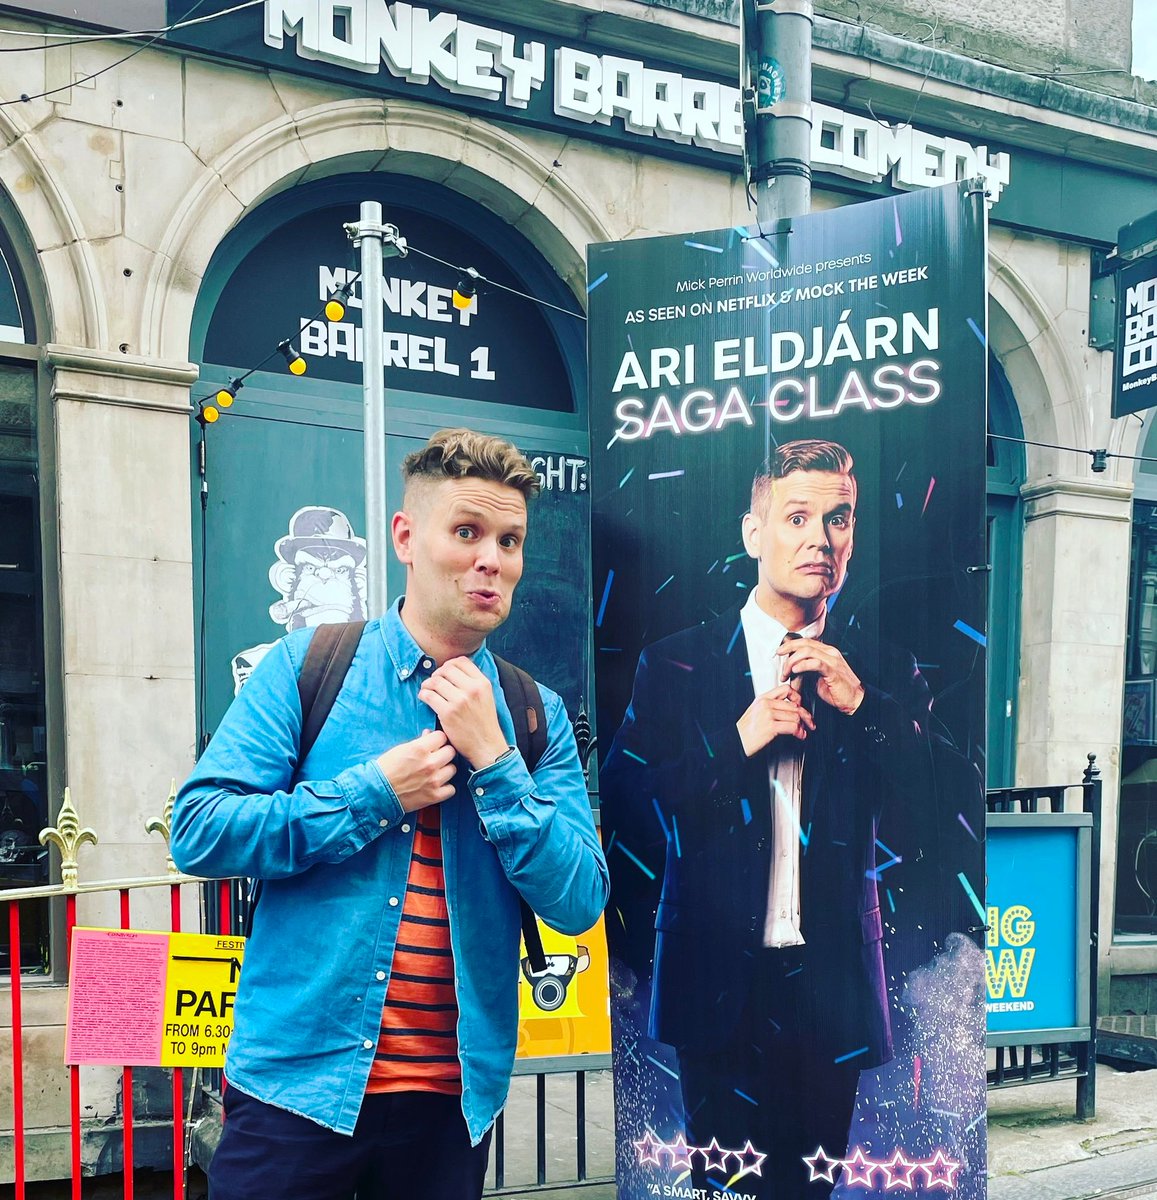 Please go and see my brilliant friend @arieldjarn whom I only get to meet in Edinburgh every few years.And I'm a fan. He's on at Monkey Barrel 4 at 3.30 pm.His audience and fan base are cult-like because we absolutely adore his stuff.And sells out quickly. @mickperrin @edfringe